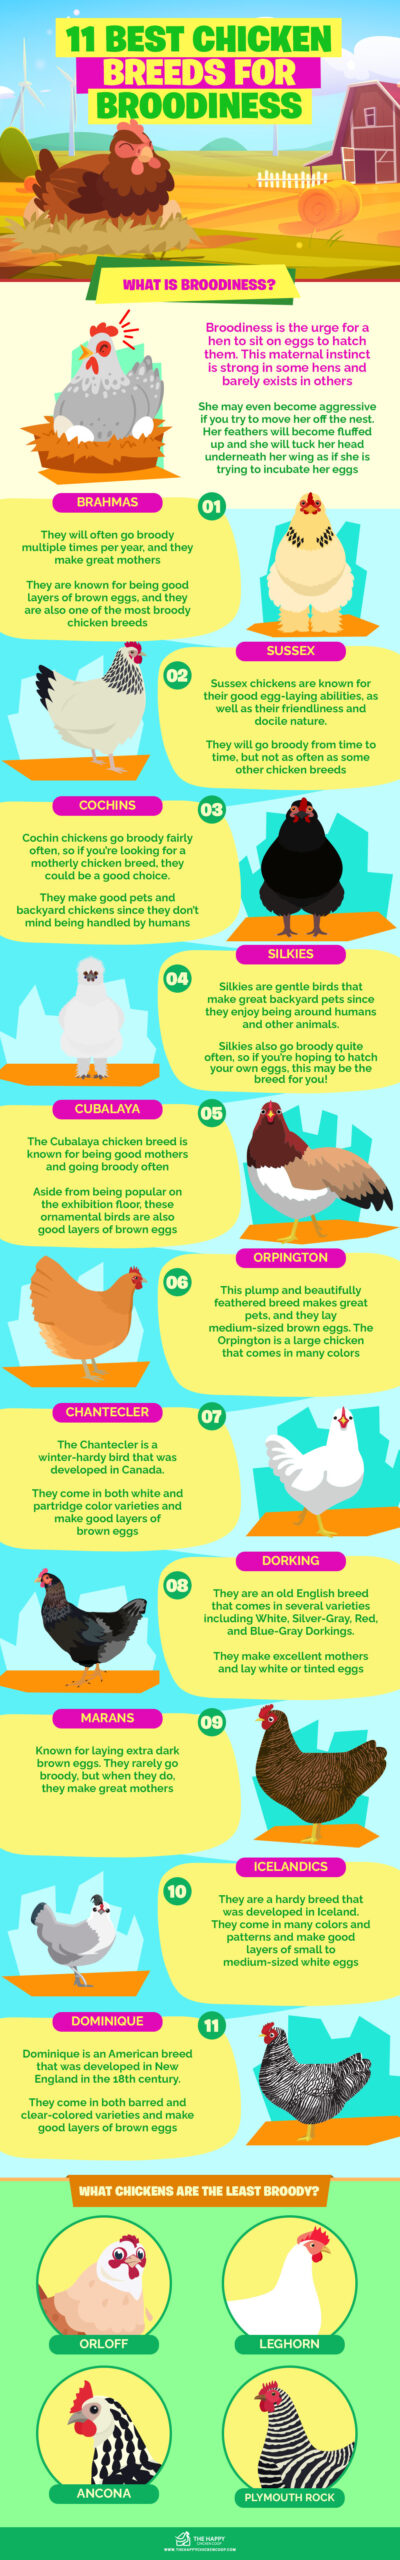 11 Best Chicken Breeds for Broodiness